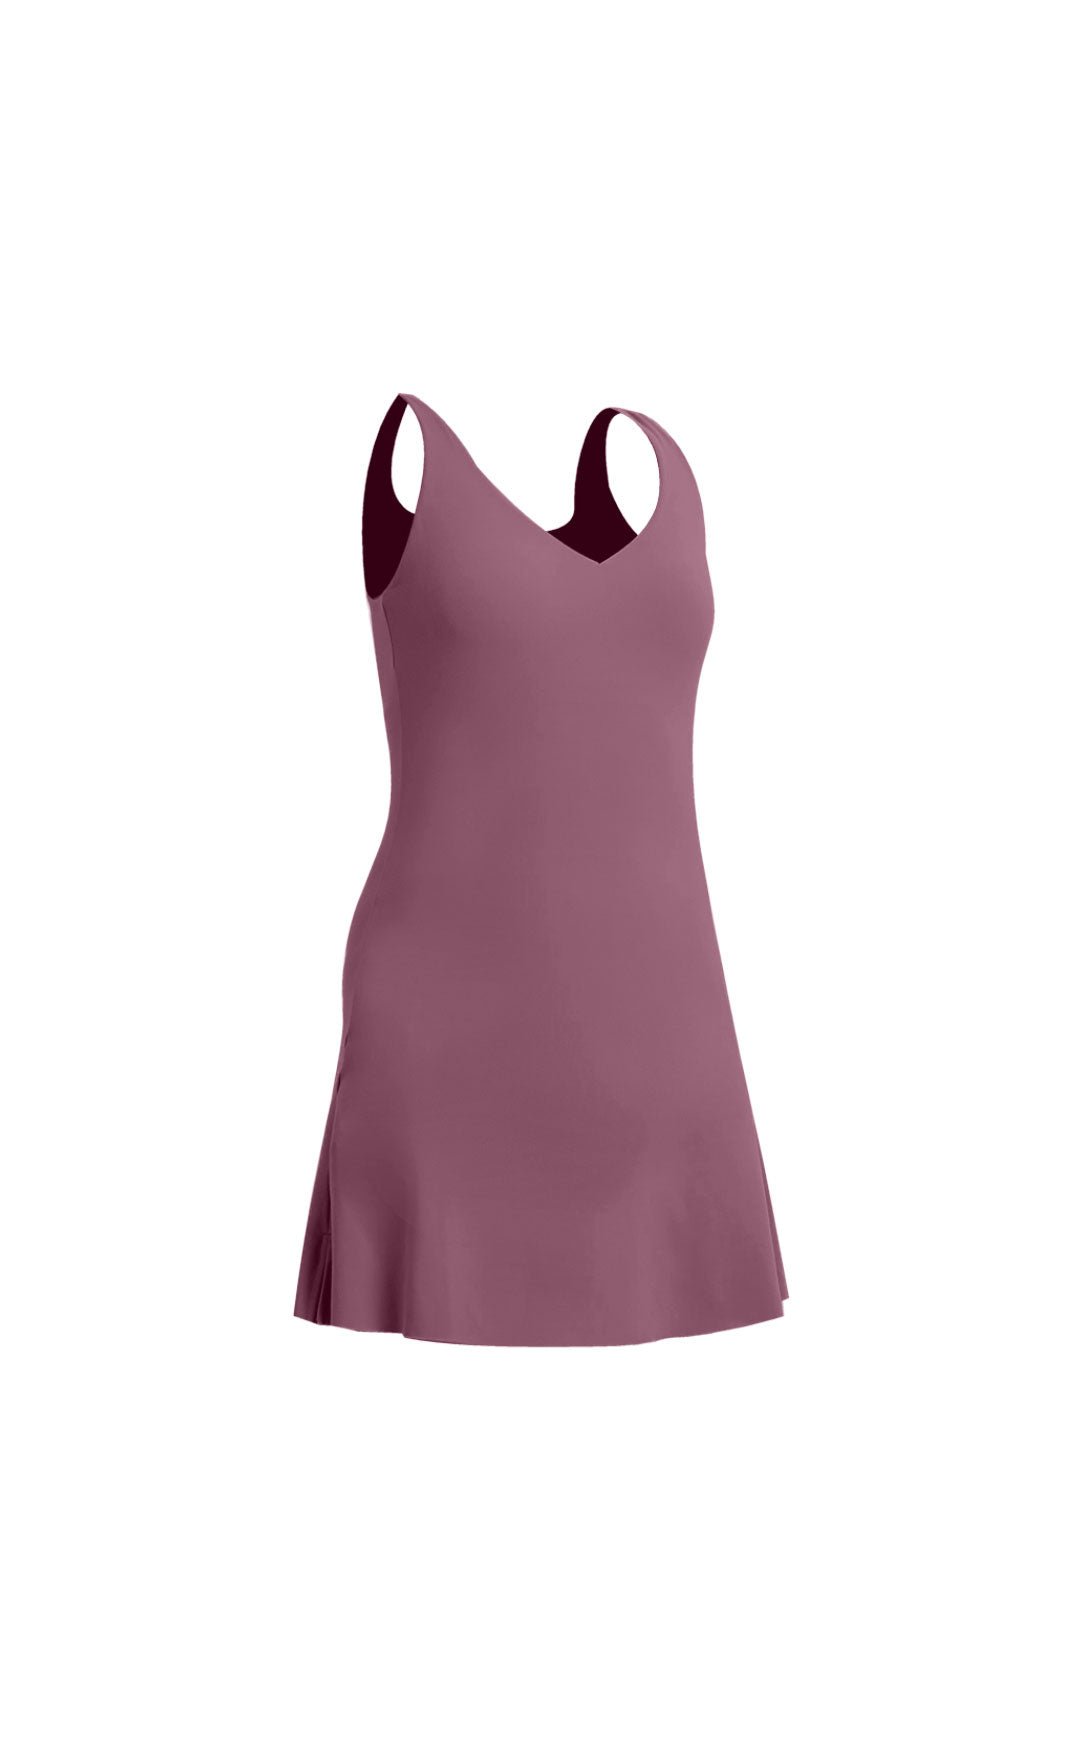 Cloud II Sport Dress - Mauve, Women's Dress from Vitality Athletic and Athleisure Wear